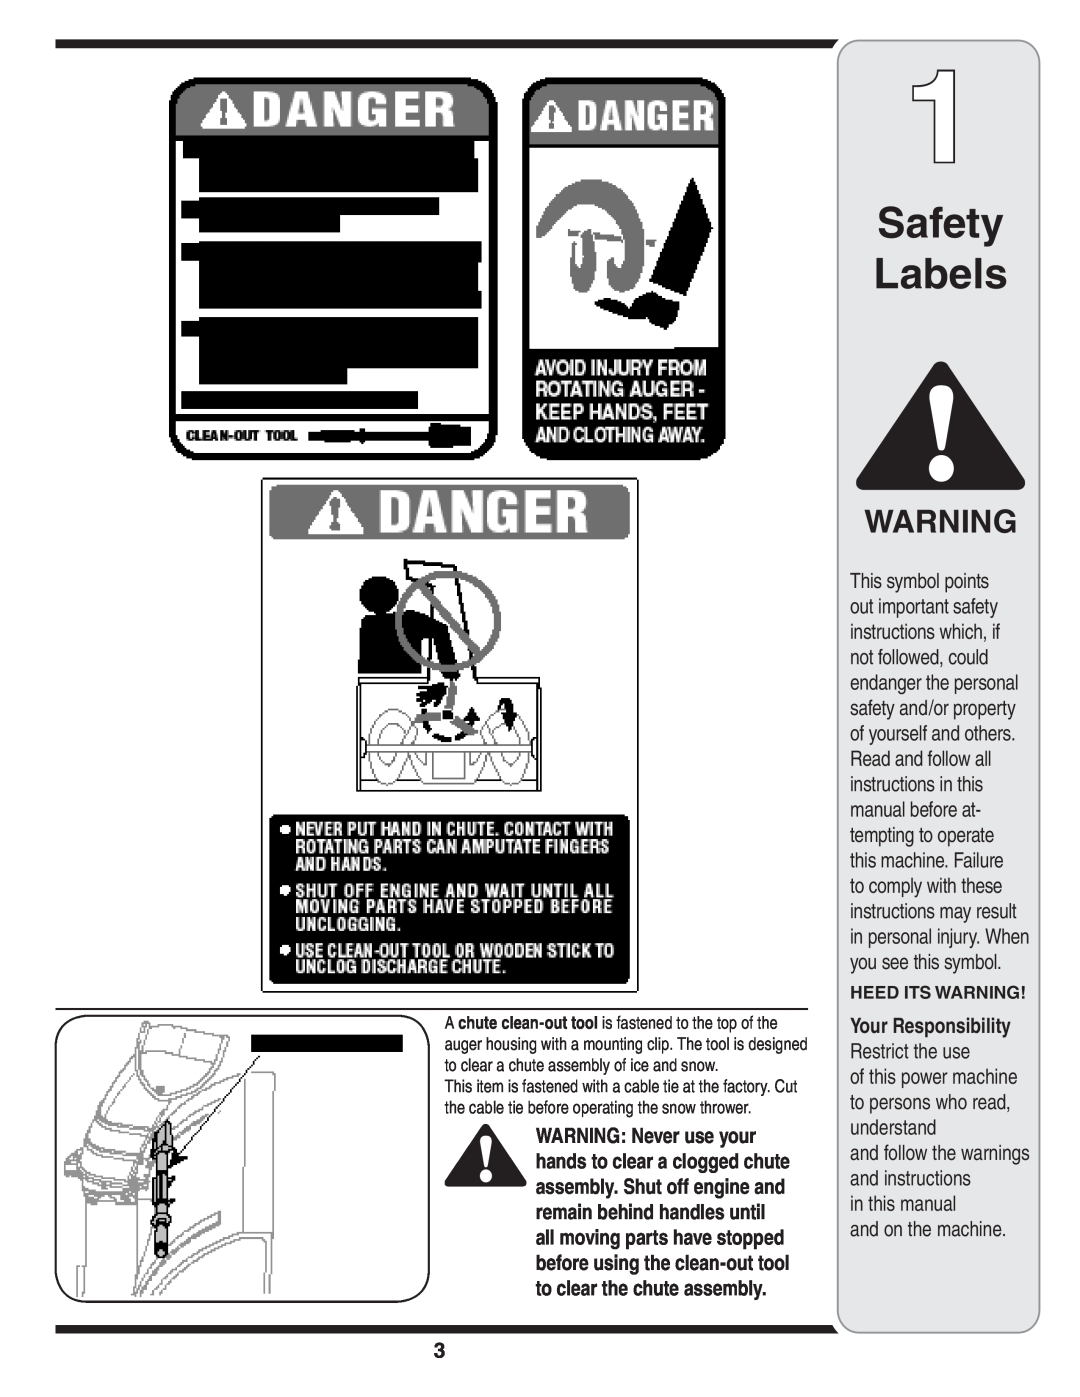 Cub Cadet WE 26 Safety Labels, Restrict the use, in this manual and on the machine, Your Responsibility, Heed Its Warning 